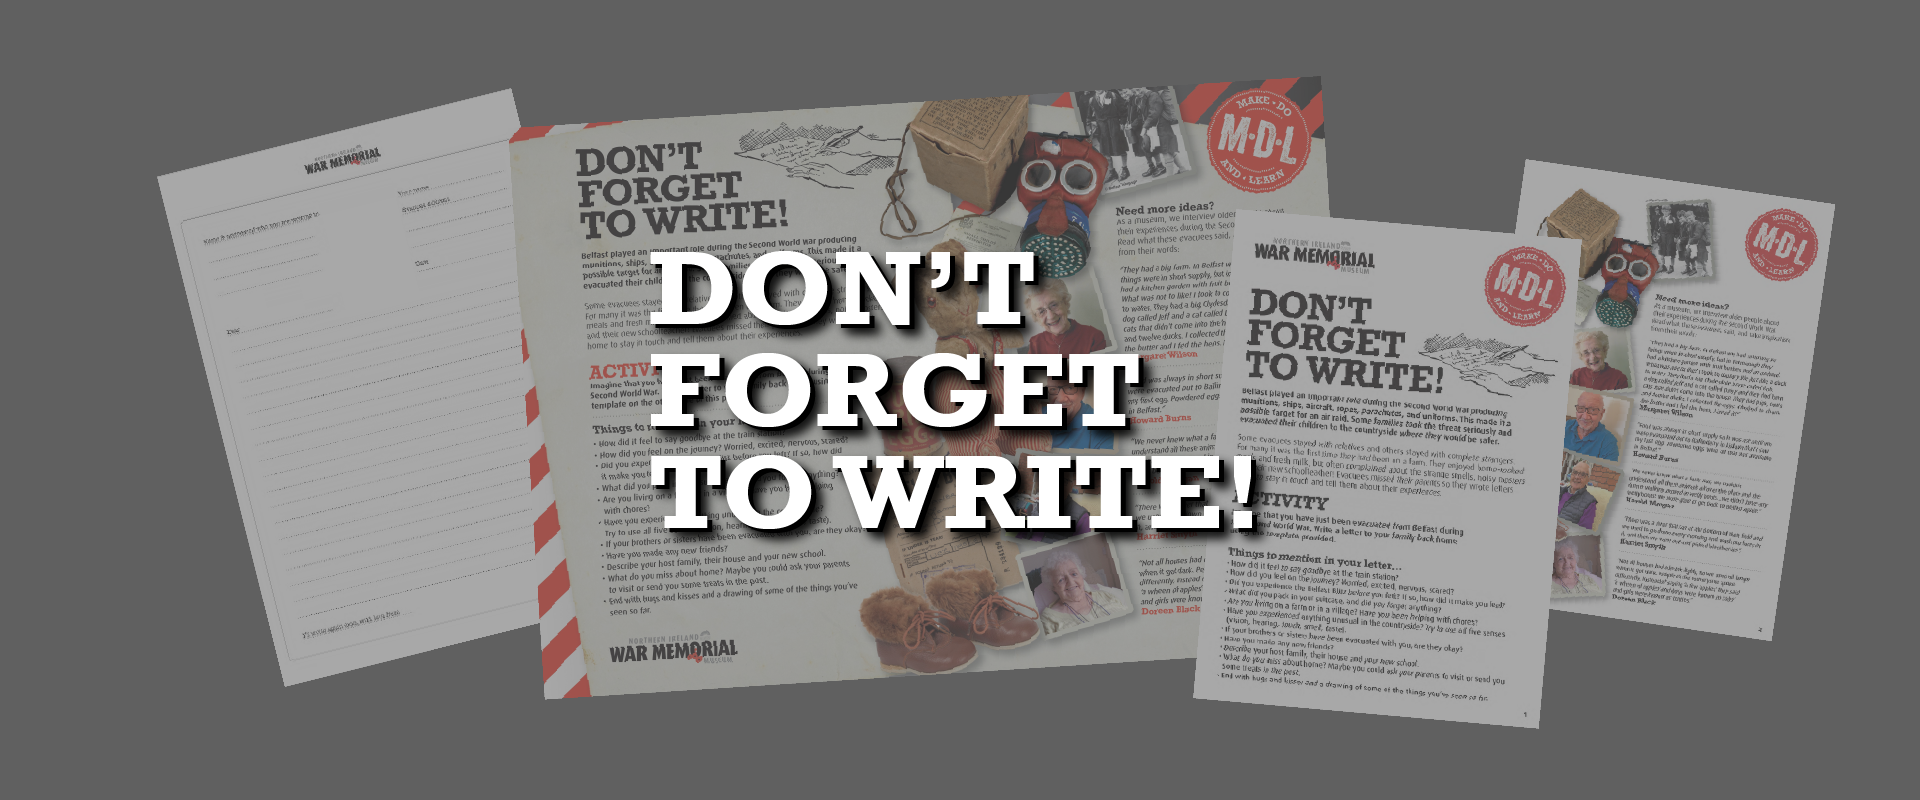 Don't Forget to Write!